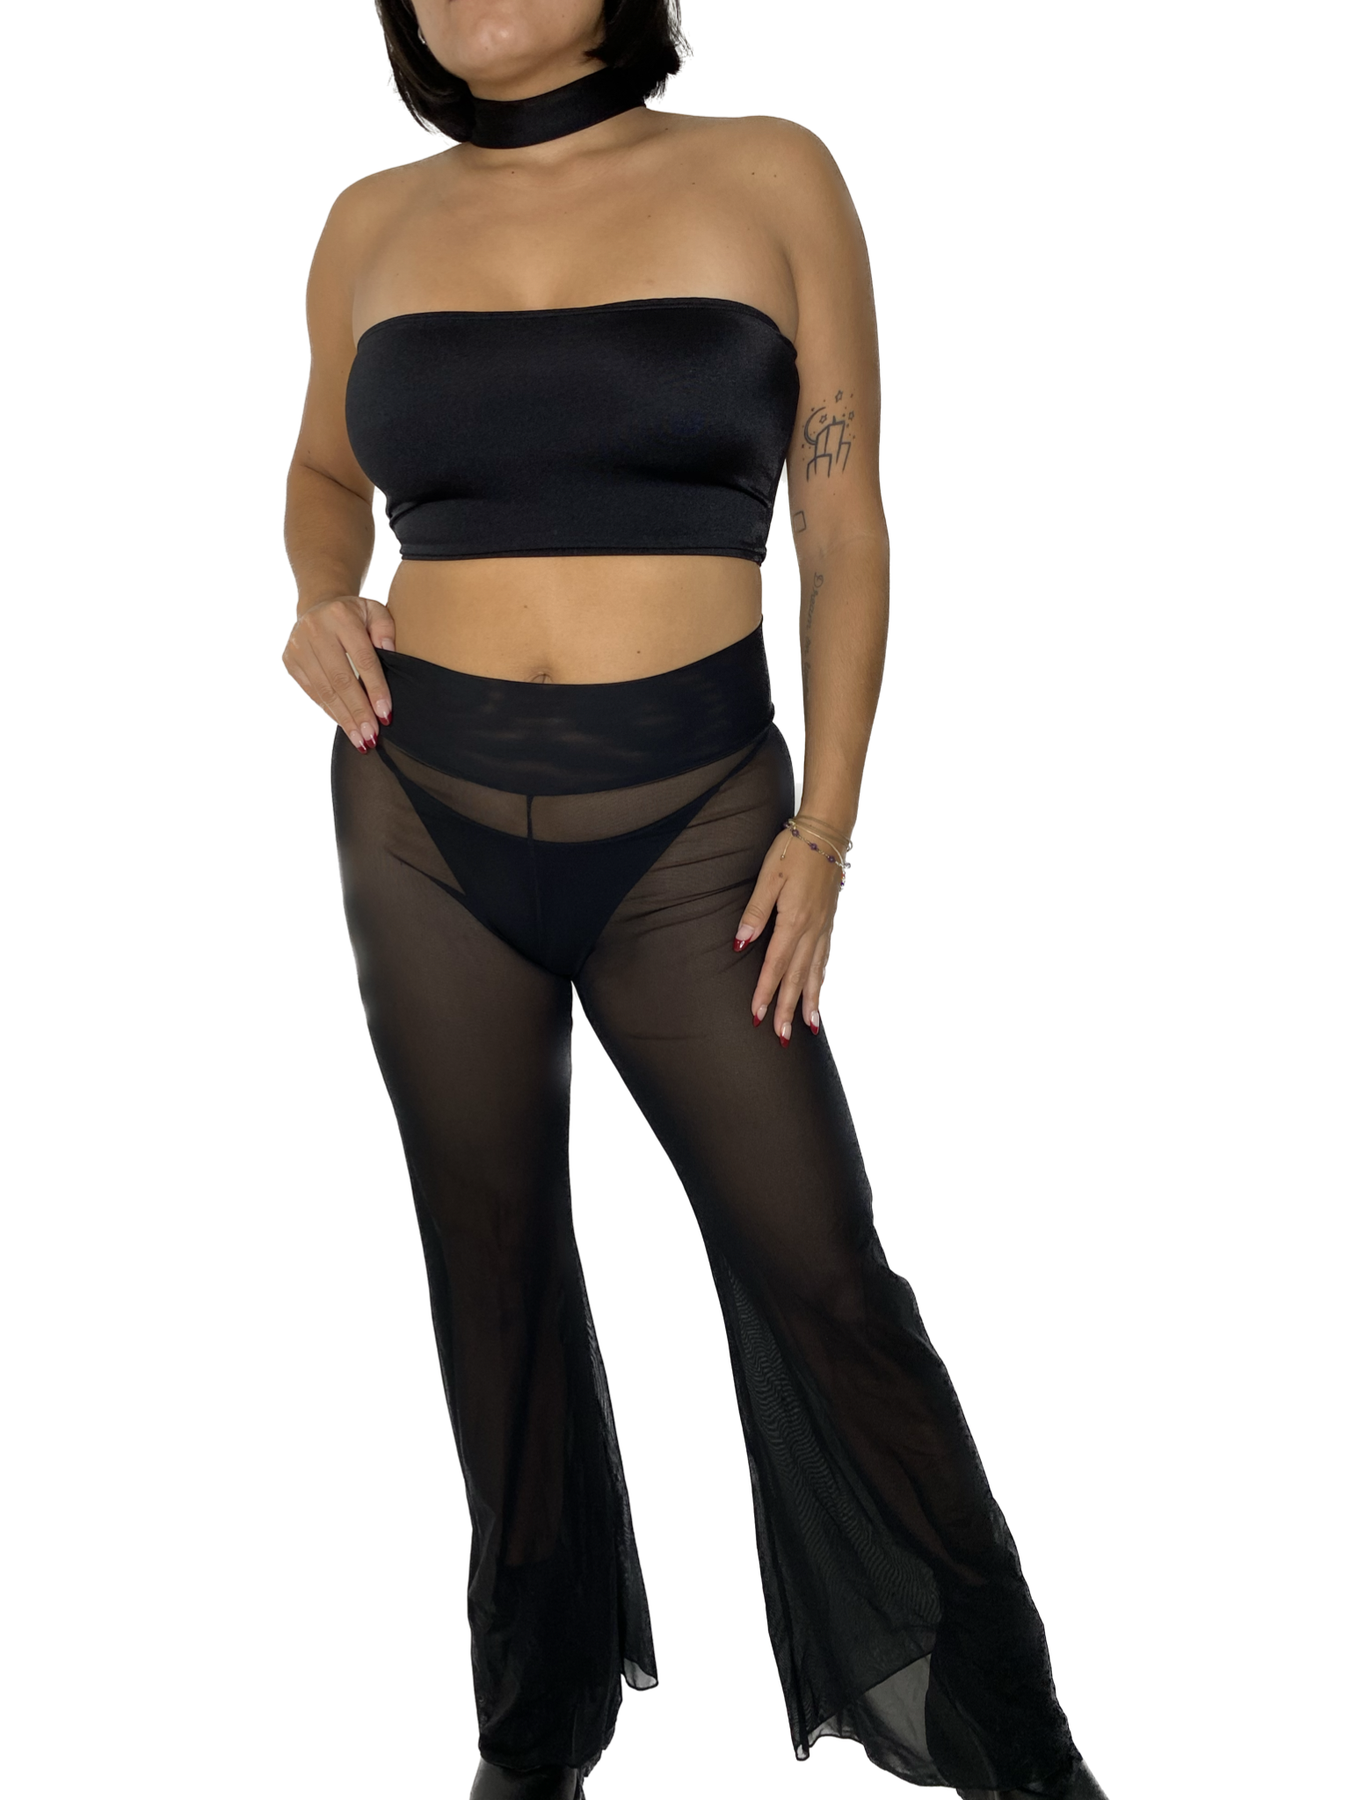 Mary's on wellington - Style# BH1507MS The most Wanted Thigh Control  Targeted fused panels provide a total transformation to tummy, bum & thighs  *Fused waist band does not roll! Natural Nude or